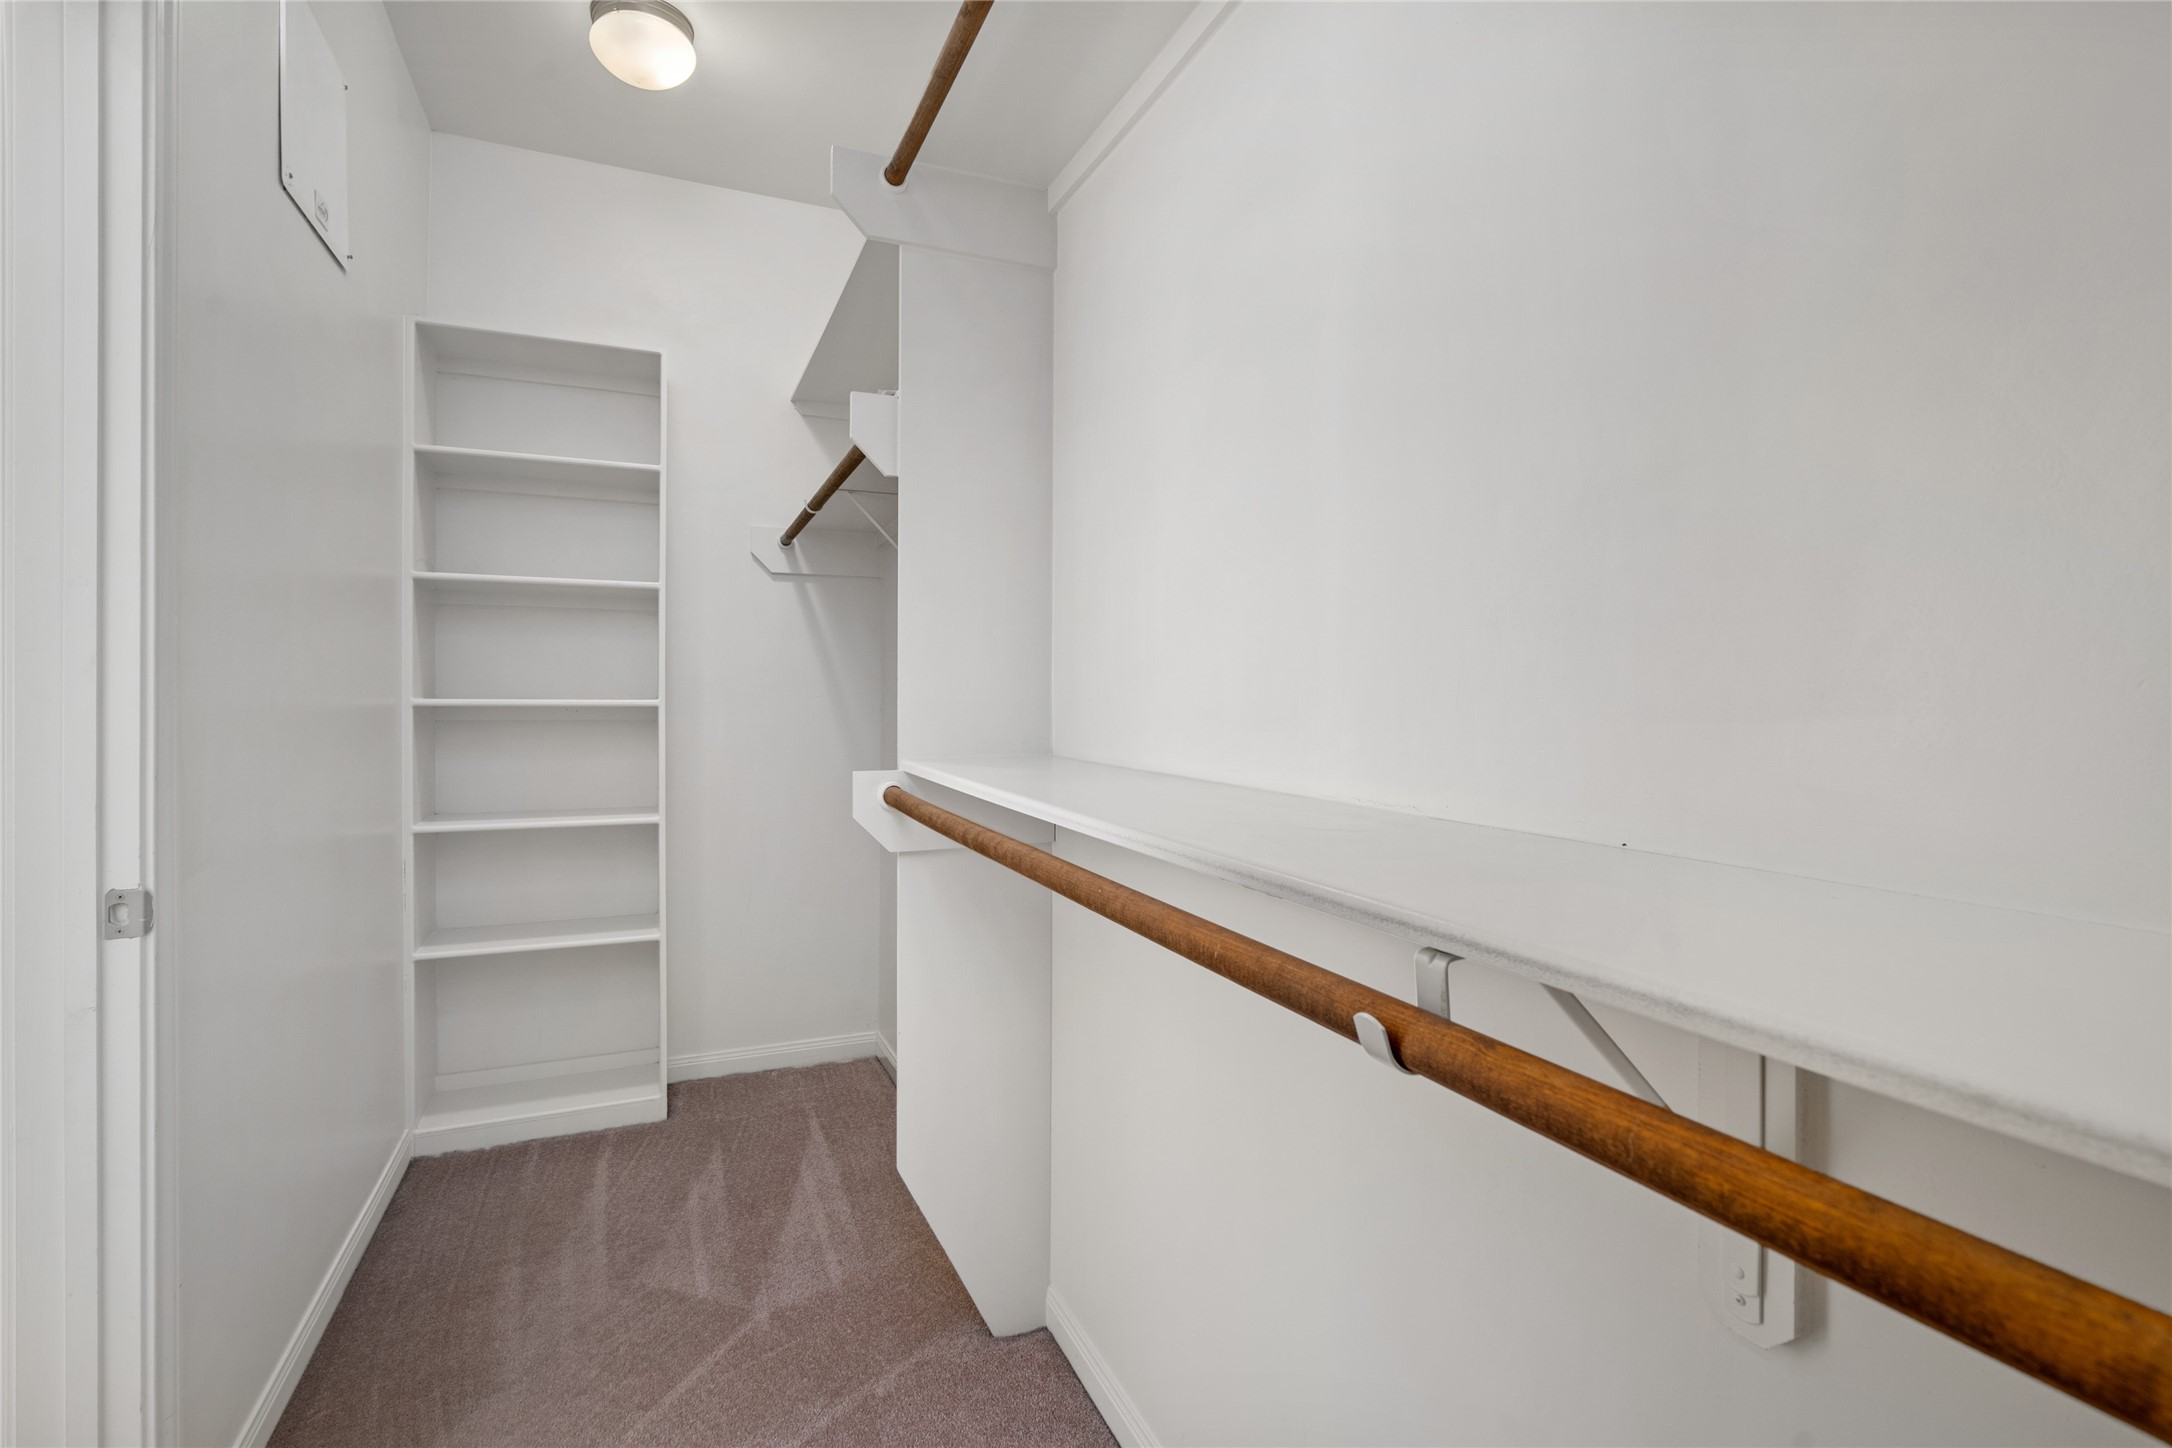 Tired of sharing a closet? Let's change that! This is one of the two walk-in closets connected to the primary bath.